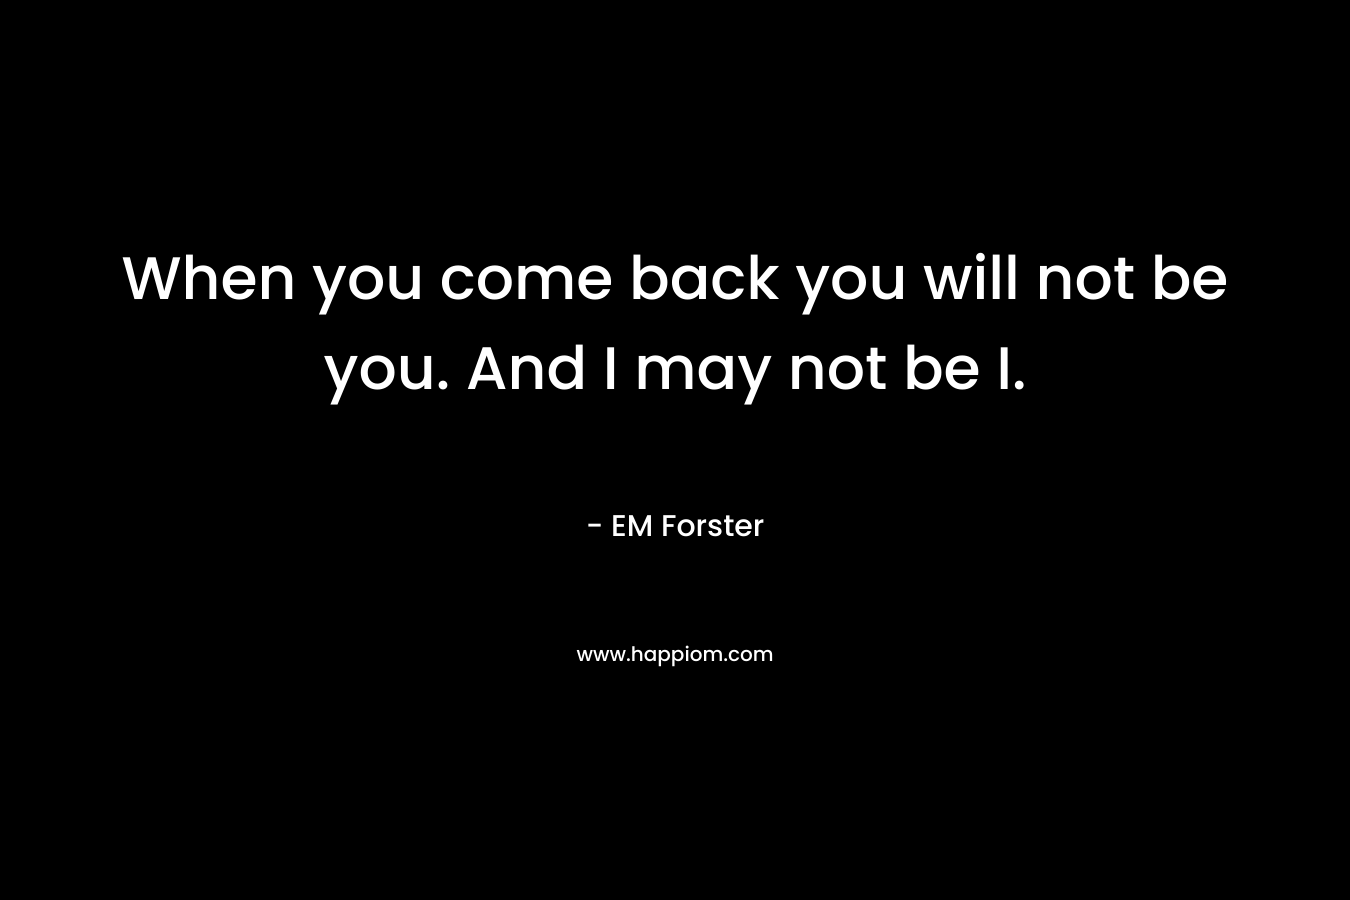 When you come back you will not be you. And I may not be I.